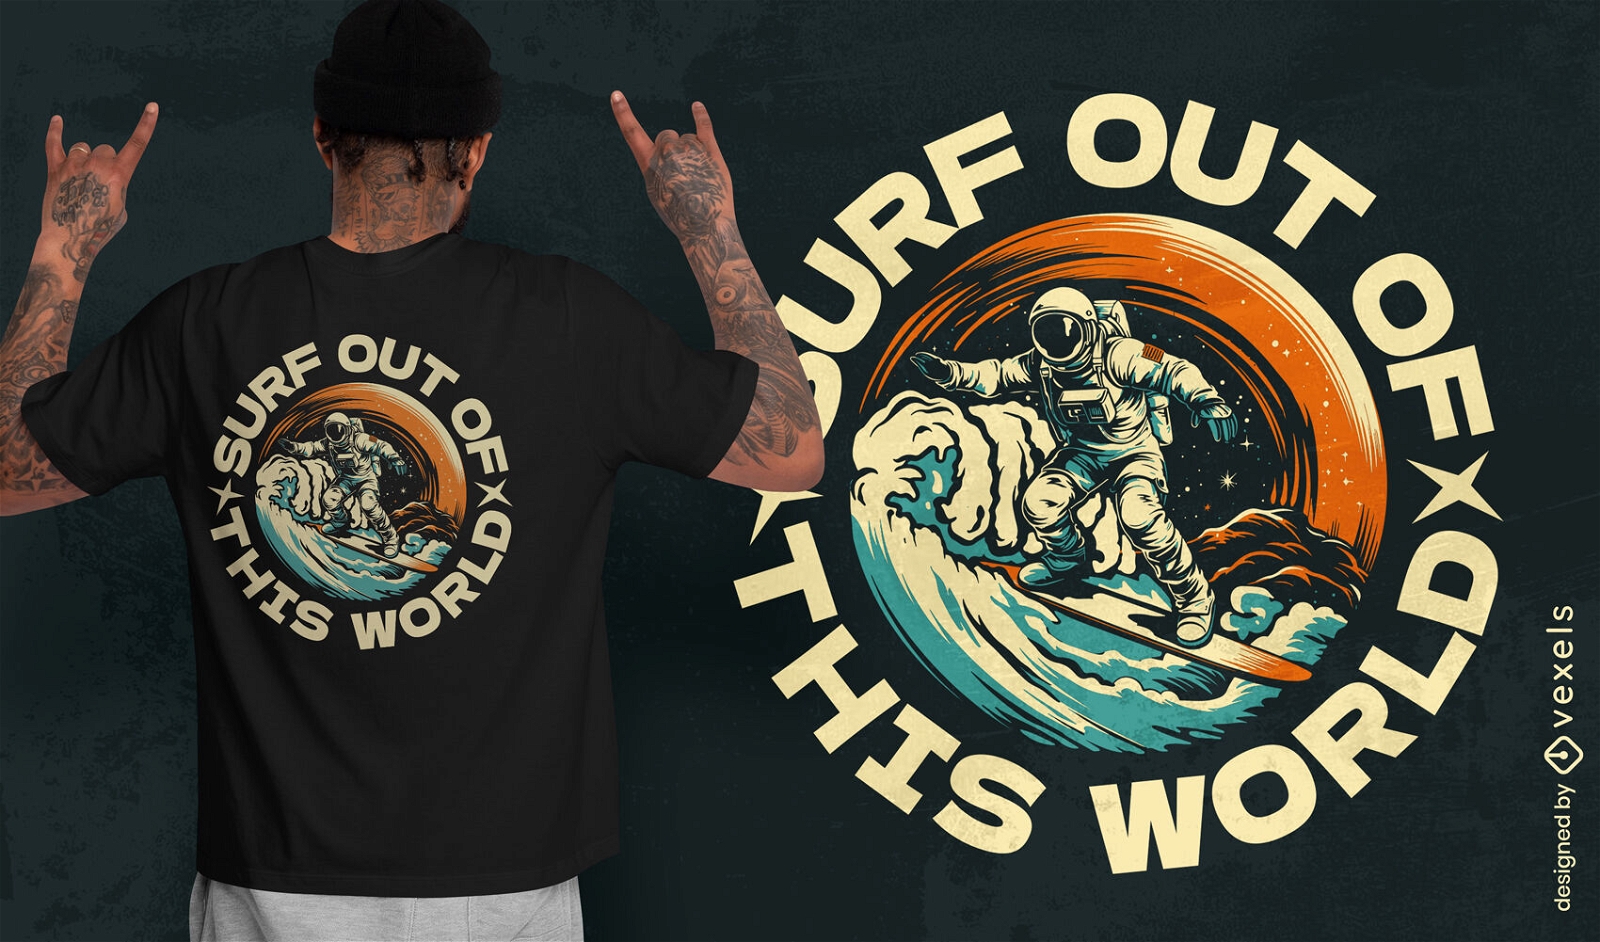 Surf out of this world t-shirt design